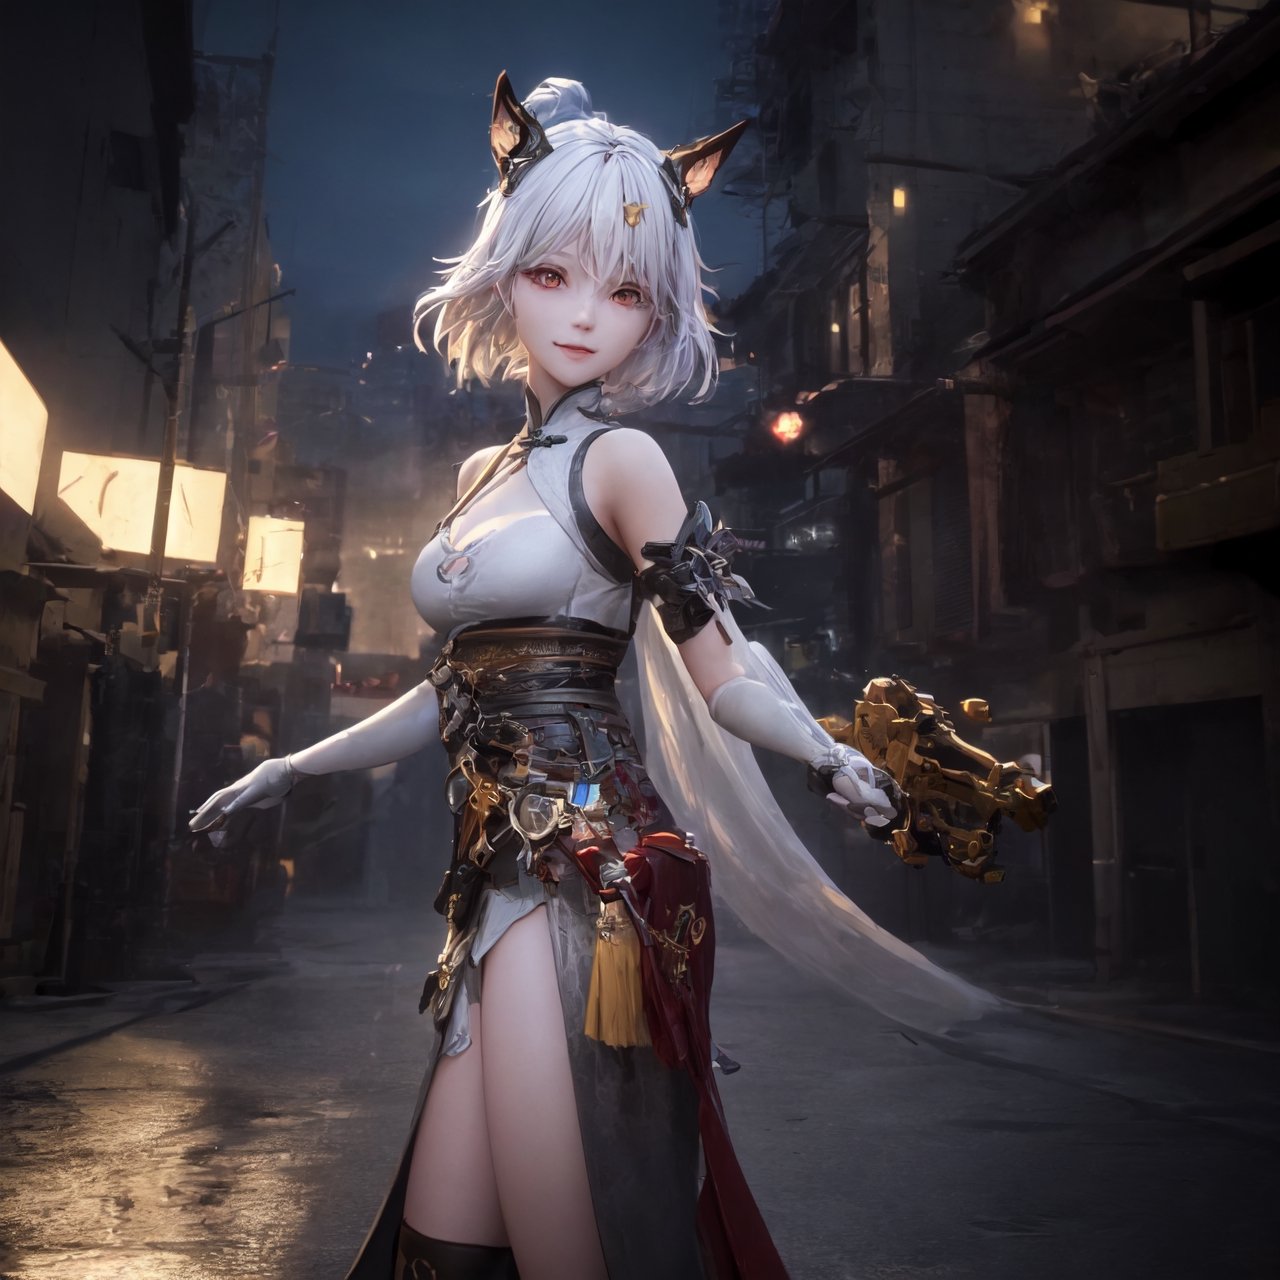 an alone mature girl, long red slice gray hair style, yellow eye, standing, china city, night time, high detail mature face, headgear,bare shoulder, china dress, white glove, black boot, black stocking, high res, ultra sharp, 8k, masterpiece, smiling, weapon, fantasy world, magical radiance background ((Best quality)), ((masterpiece)), 3D, HDR (High Dynamic Range),Ray Tracing, NVIDIA RTX, Super-Resolution, Unreal 5,Subsurface scattering, PBR Texturing, Post-processing, Anisotropic Filtering, Depth-of-field, Maximum clarity and sharpness, Multi-layered textures, Albedo and Specular maps, Surface shading, Accurate simulation of light-material interaction, Perfect proportions, Octane Render, Two-tone lighting, Wide aperture, Low ISO, White balance, Rule of thirds,8K RAW, Aura, masterpiece, best quality, Mysterious expression, magical effects like sparkles or energy, flowing robes or enchanting attire, mechanic creatures or mystical background, rim lighting, side lighting, cinematic light, ultra high res, 8k uhd, film grain, best shadow, delicate, RAW, light particles, detailed skin texture, detailed cloth texture, beautiful face, (masterpiece), best quality, expressive eyes, perfect face,1 girl